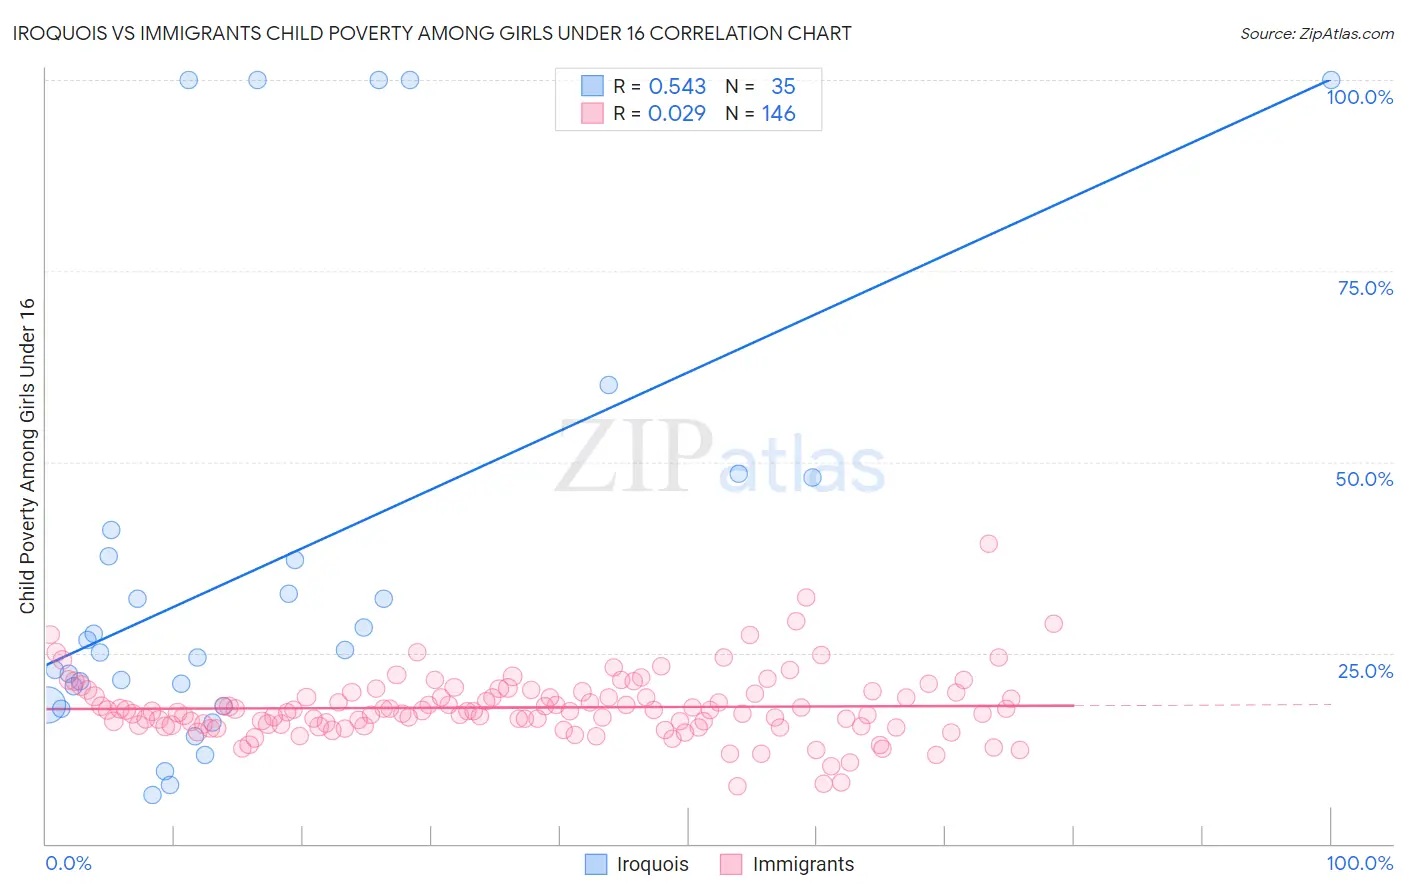 Iroquois vs Immigrants Child Poverty Among Girls Under 16